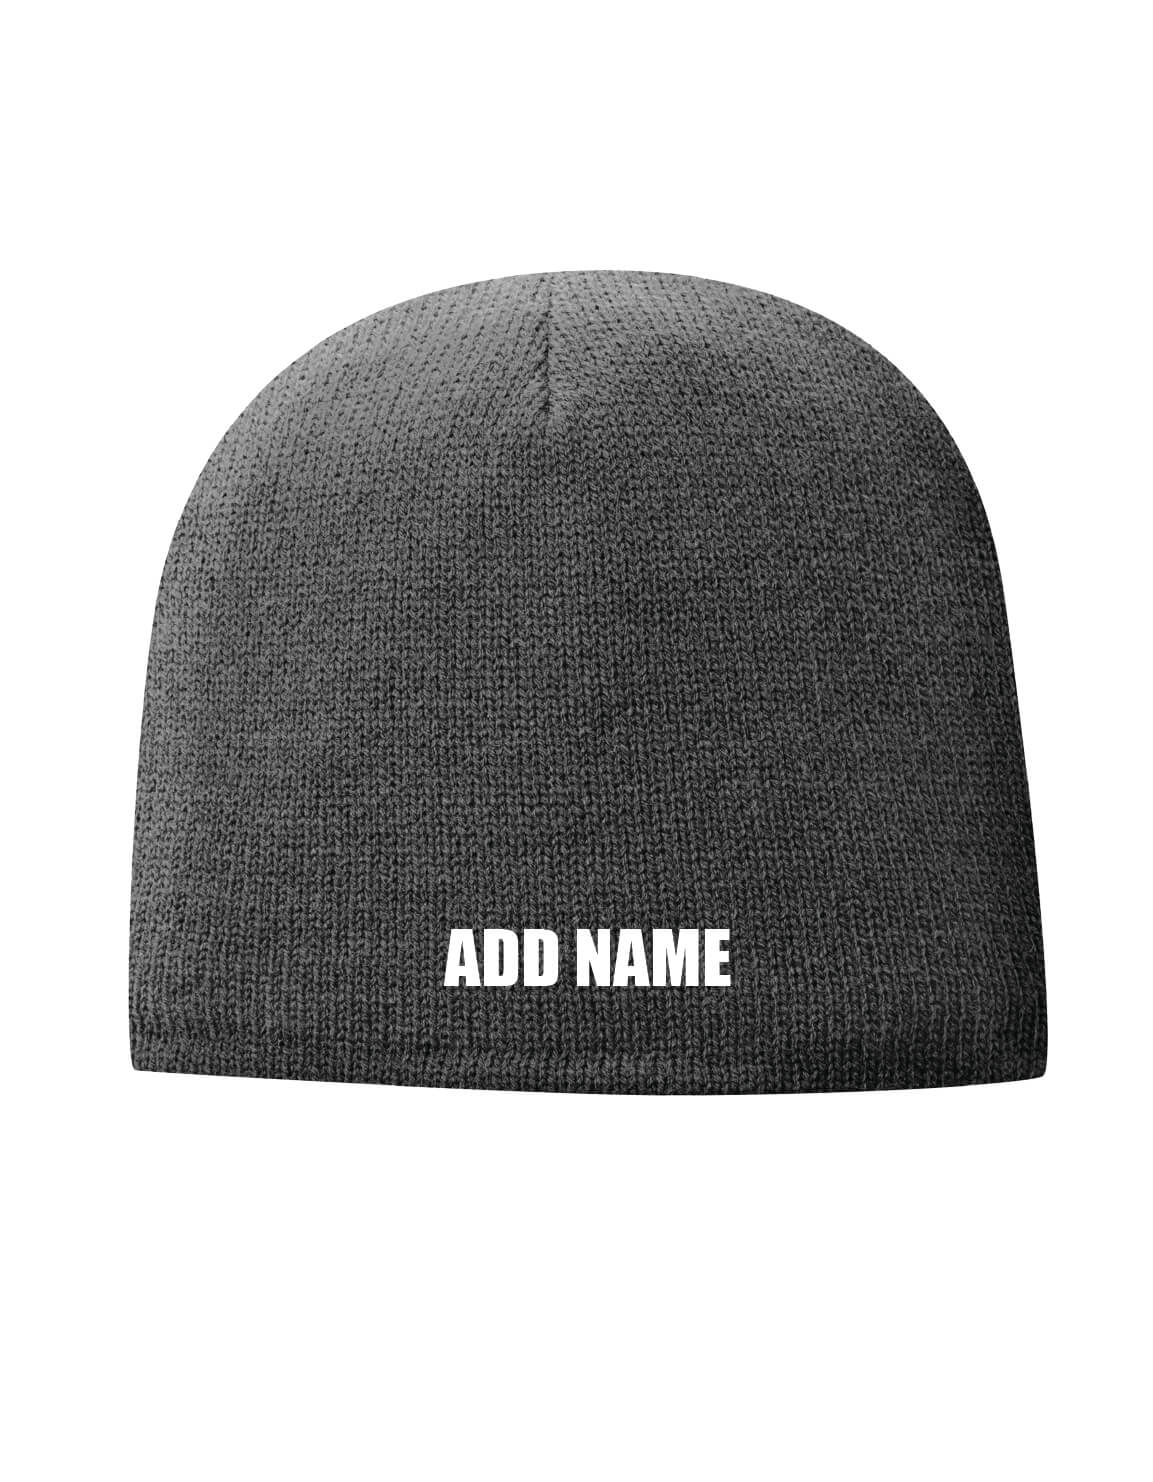 Fleece Lined Beanie - personalized back, gray